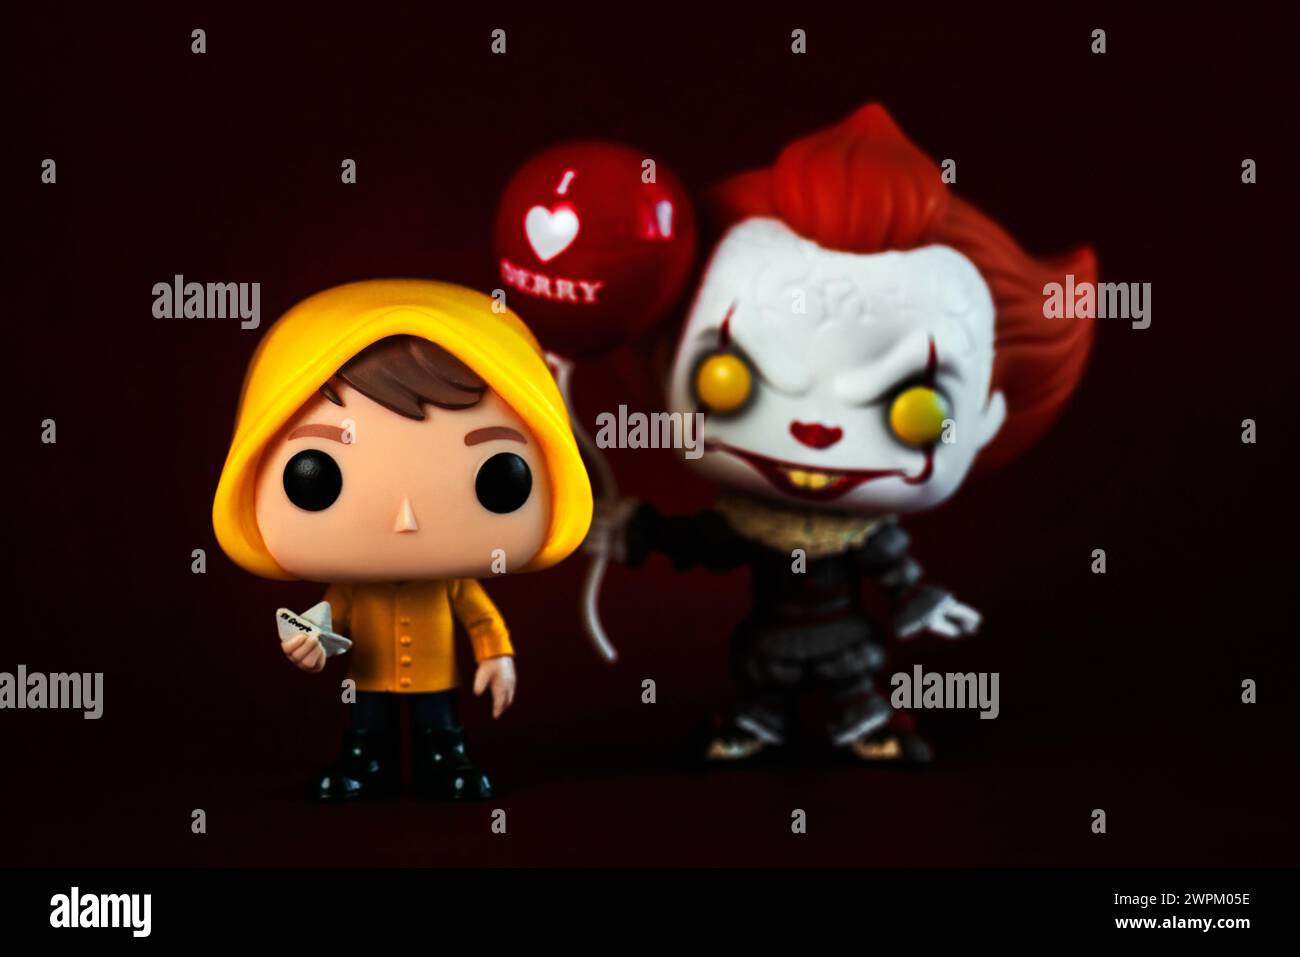 Funko POP vinyl figures of Pennywise with balloon and Georgie characters of the movies and the book It over dark background. Illustrative editorial Stock Photo